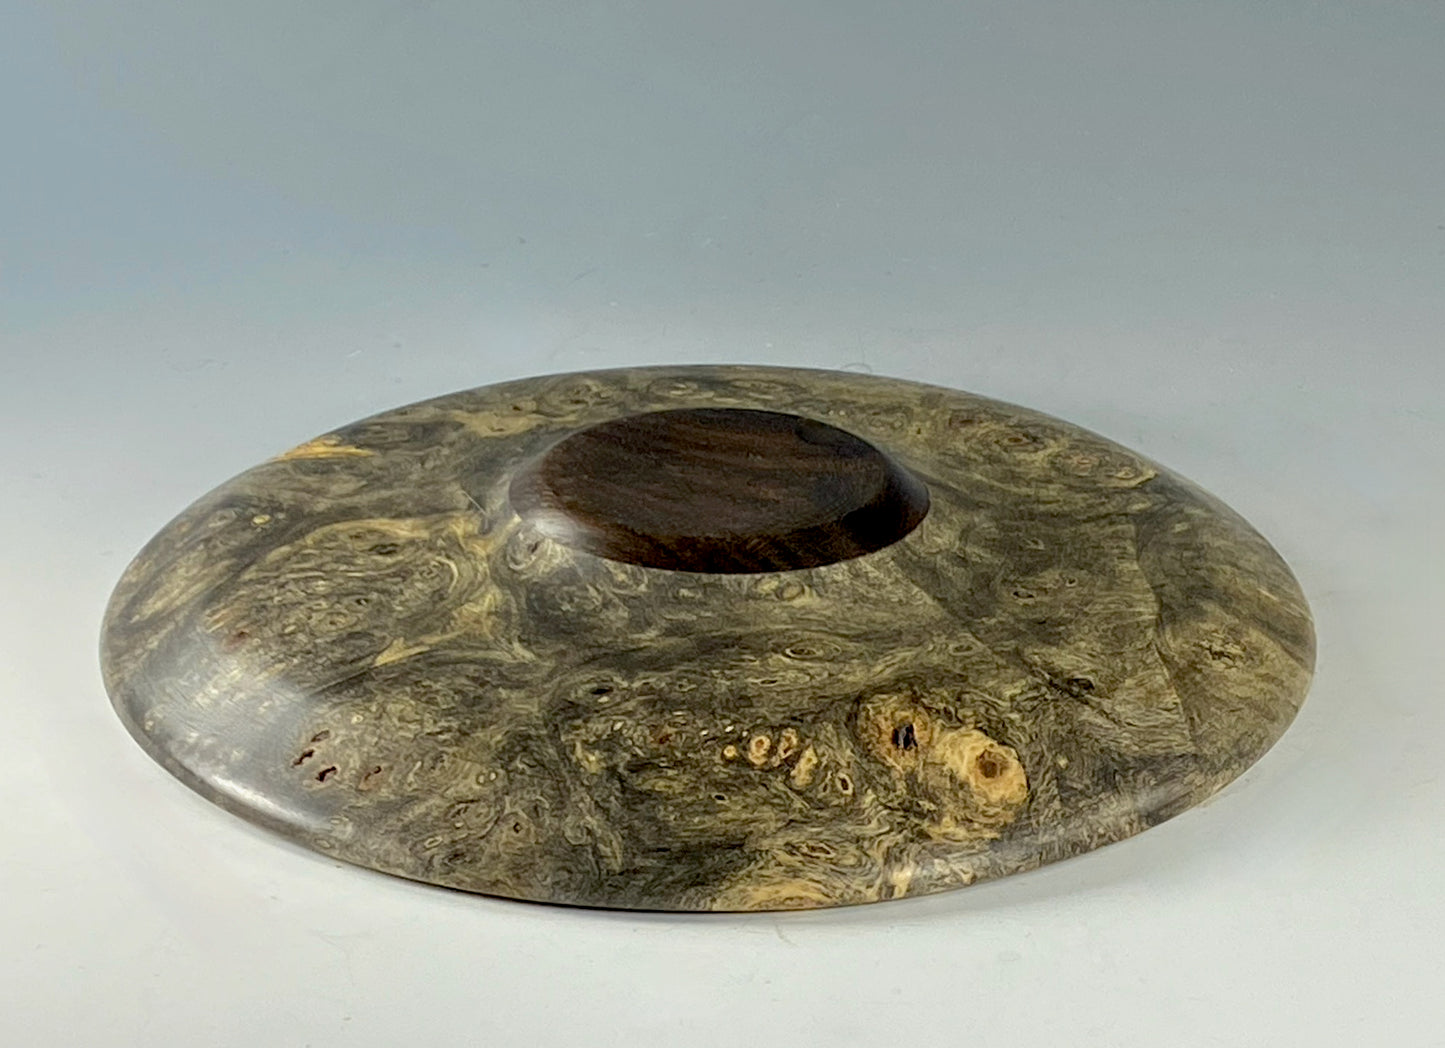 ICKIBANA TURNED FROM BUCKEYE BURL, WITH WATER-HOLDING PIN BARREL AND ZIRICOTE FOOT